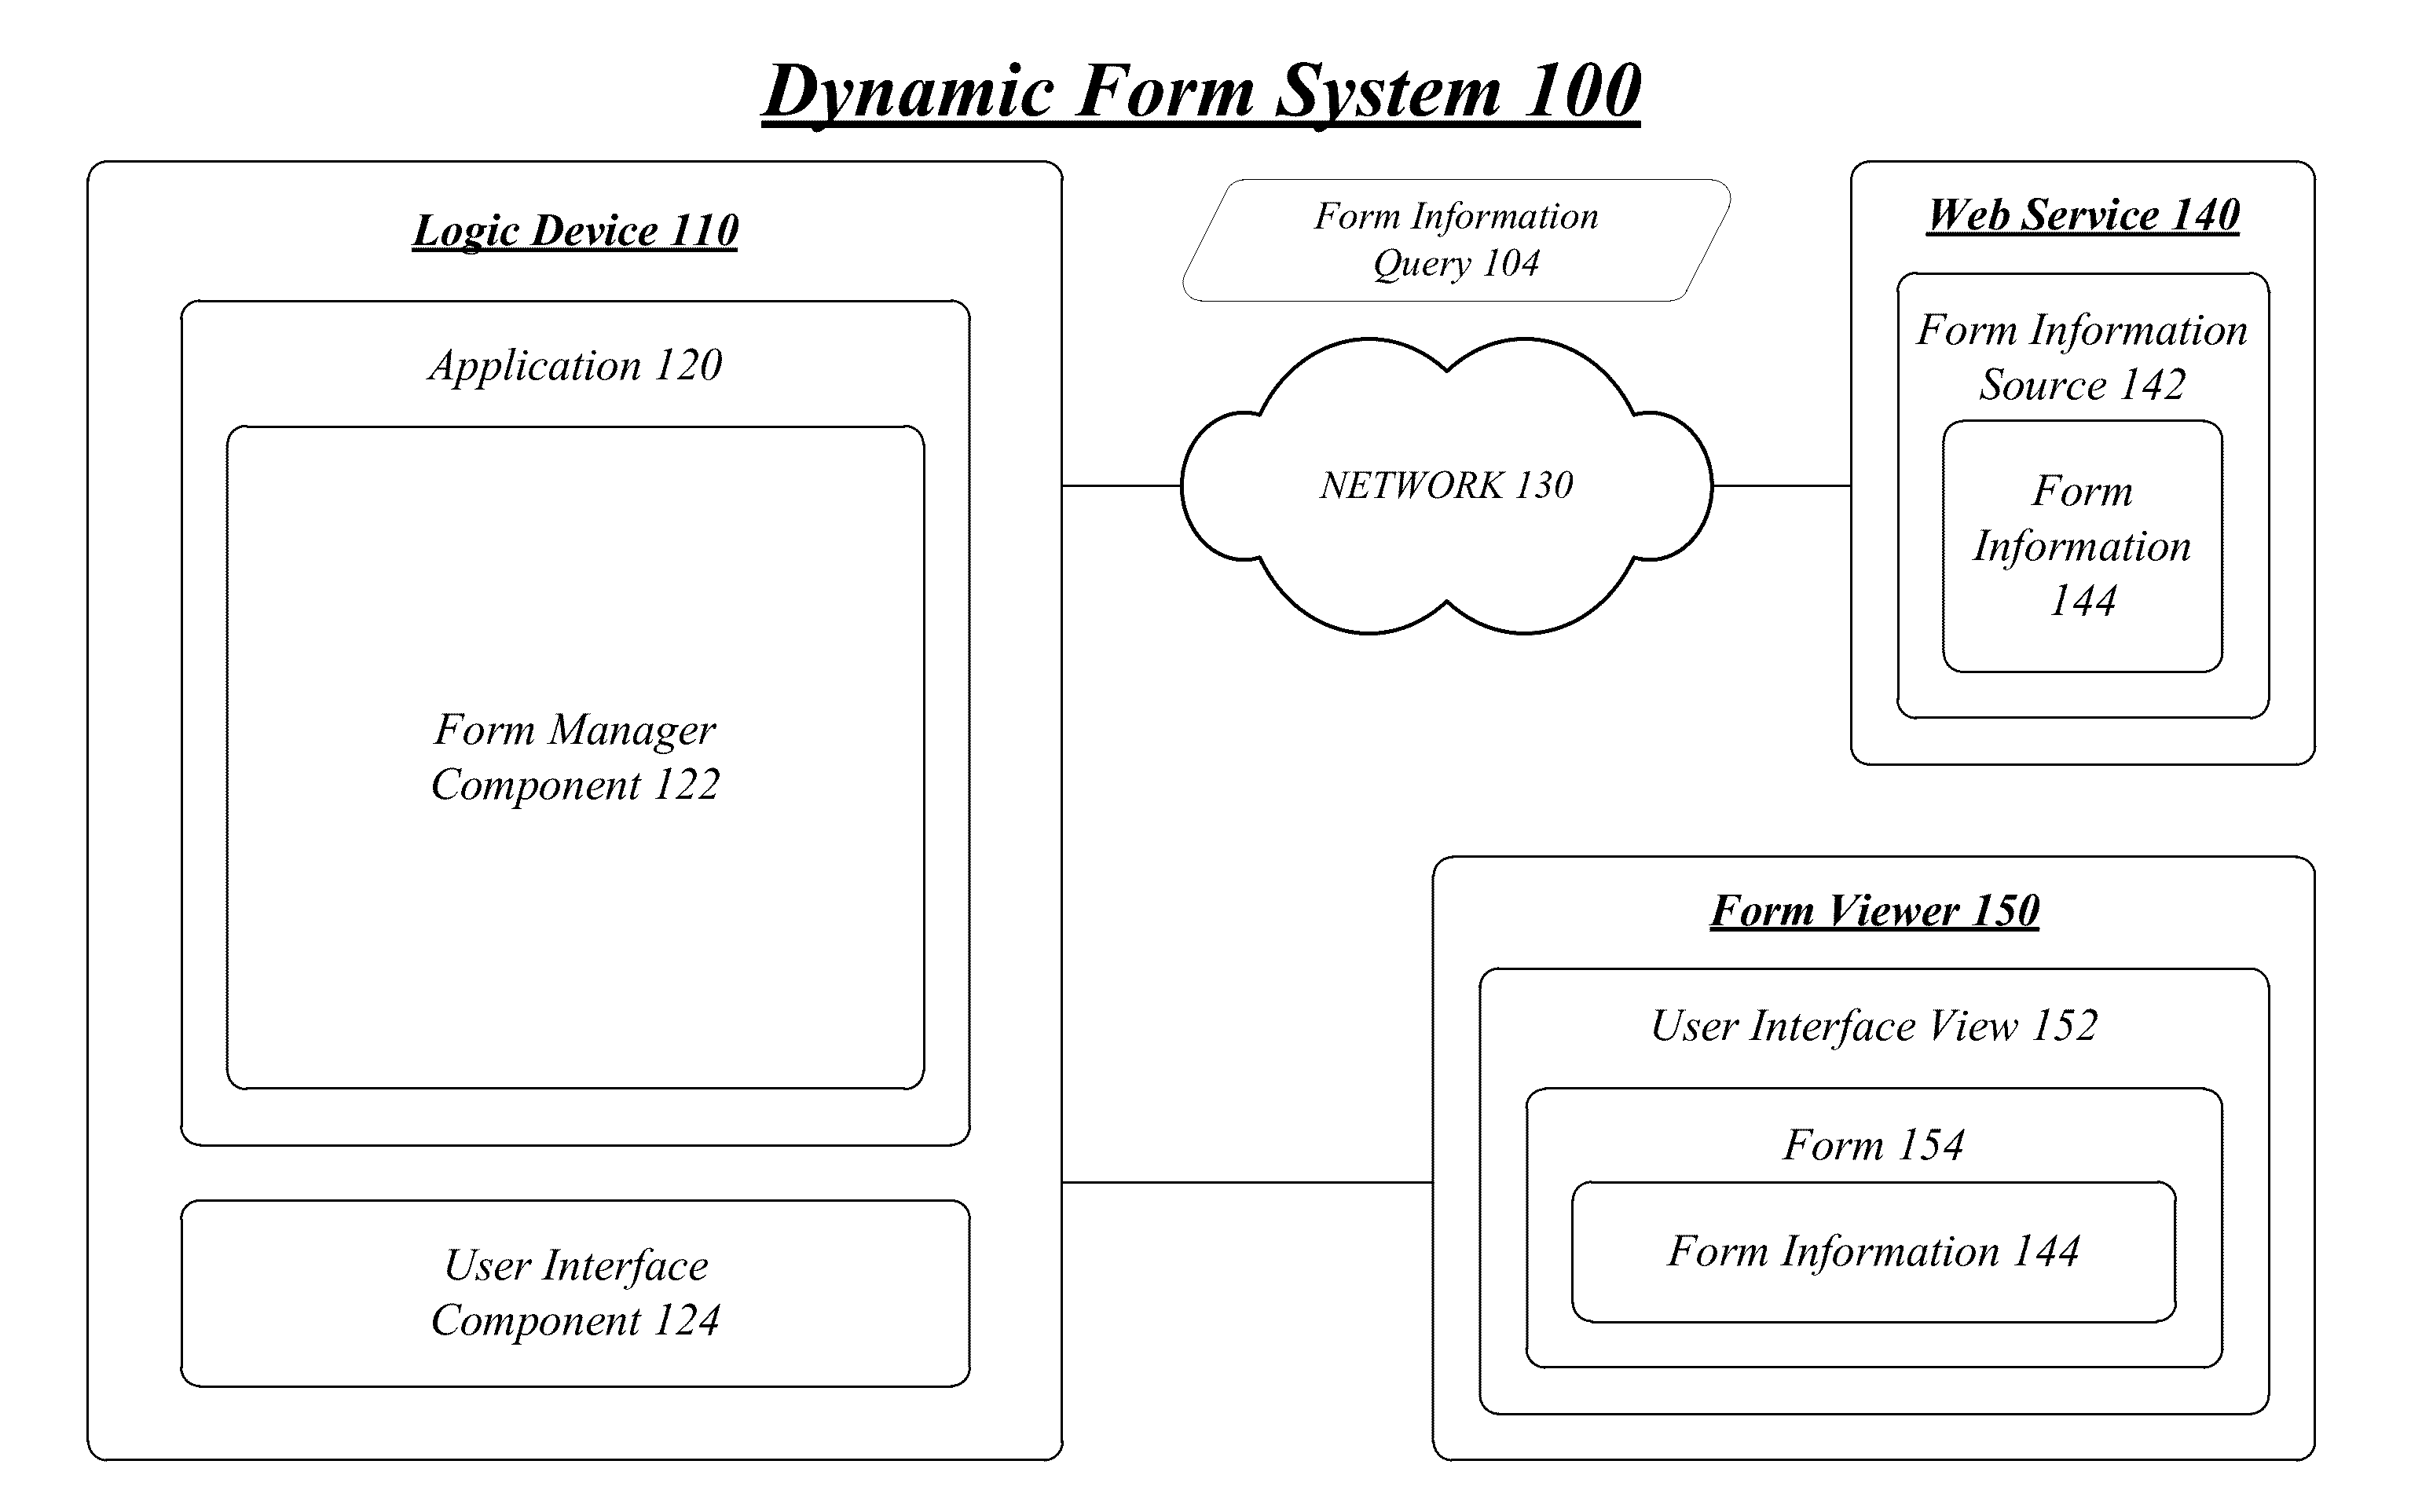 Techniques to remotely access form information and generate a form